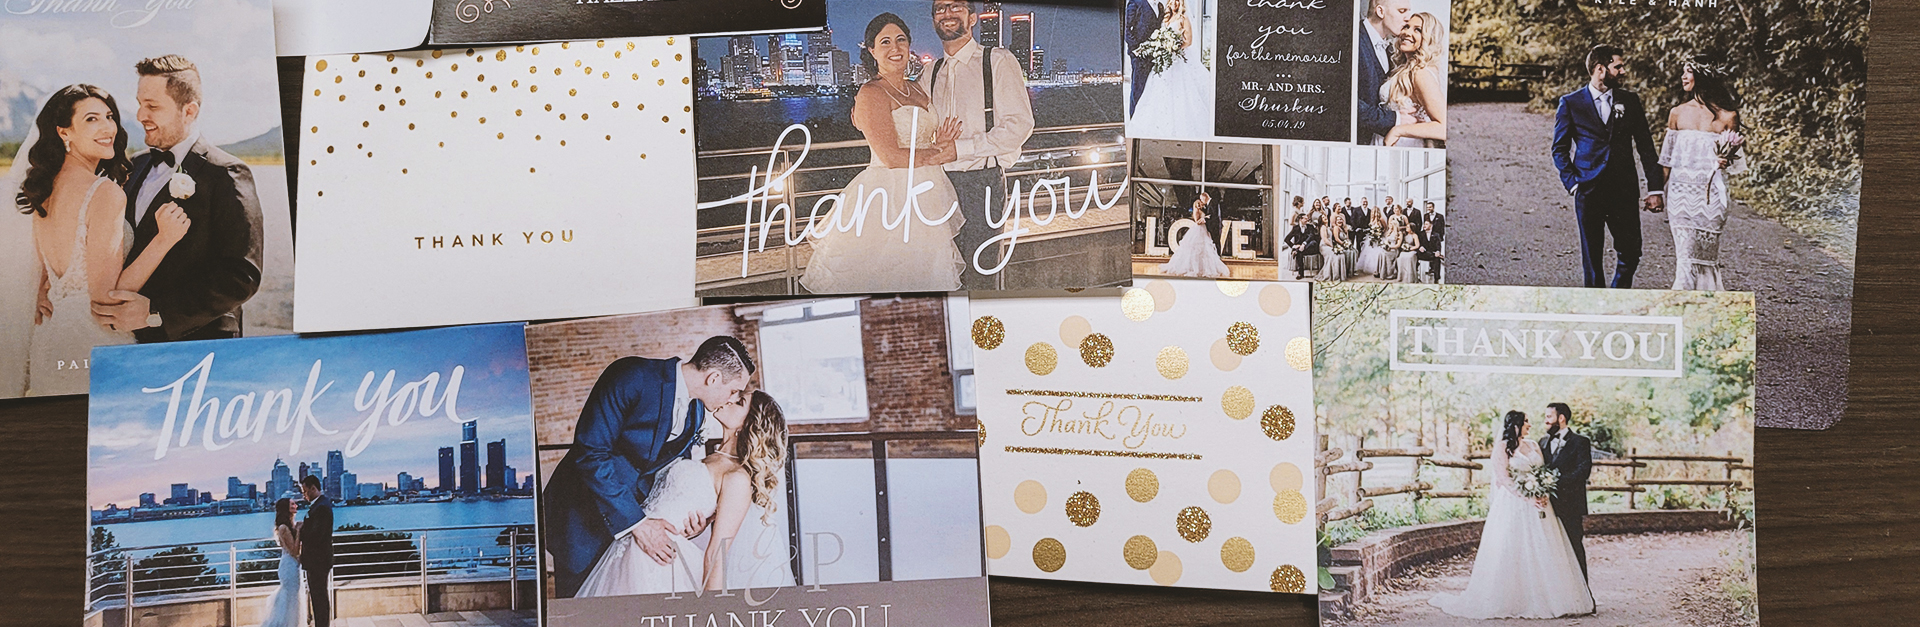 Thank you cards laid out on a table